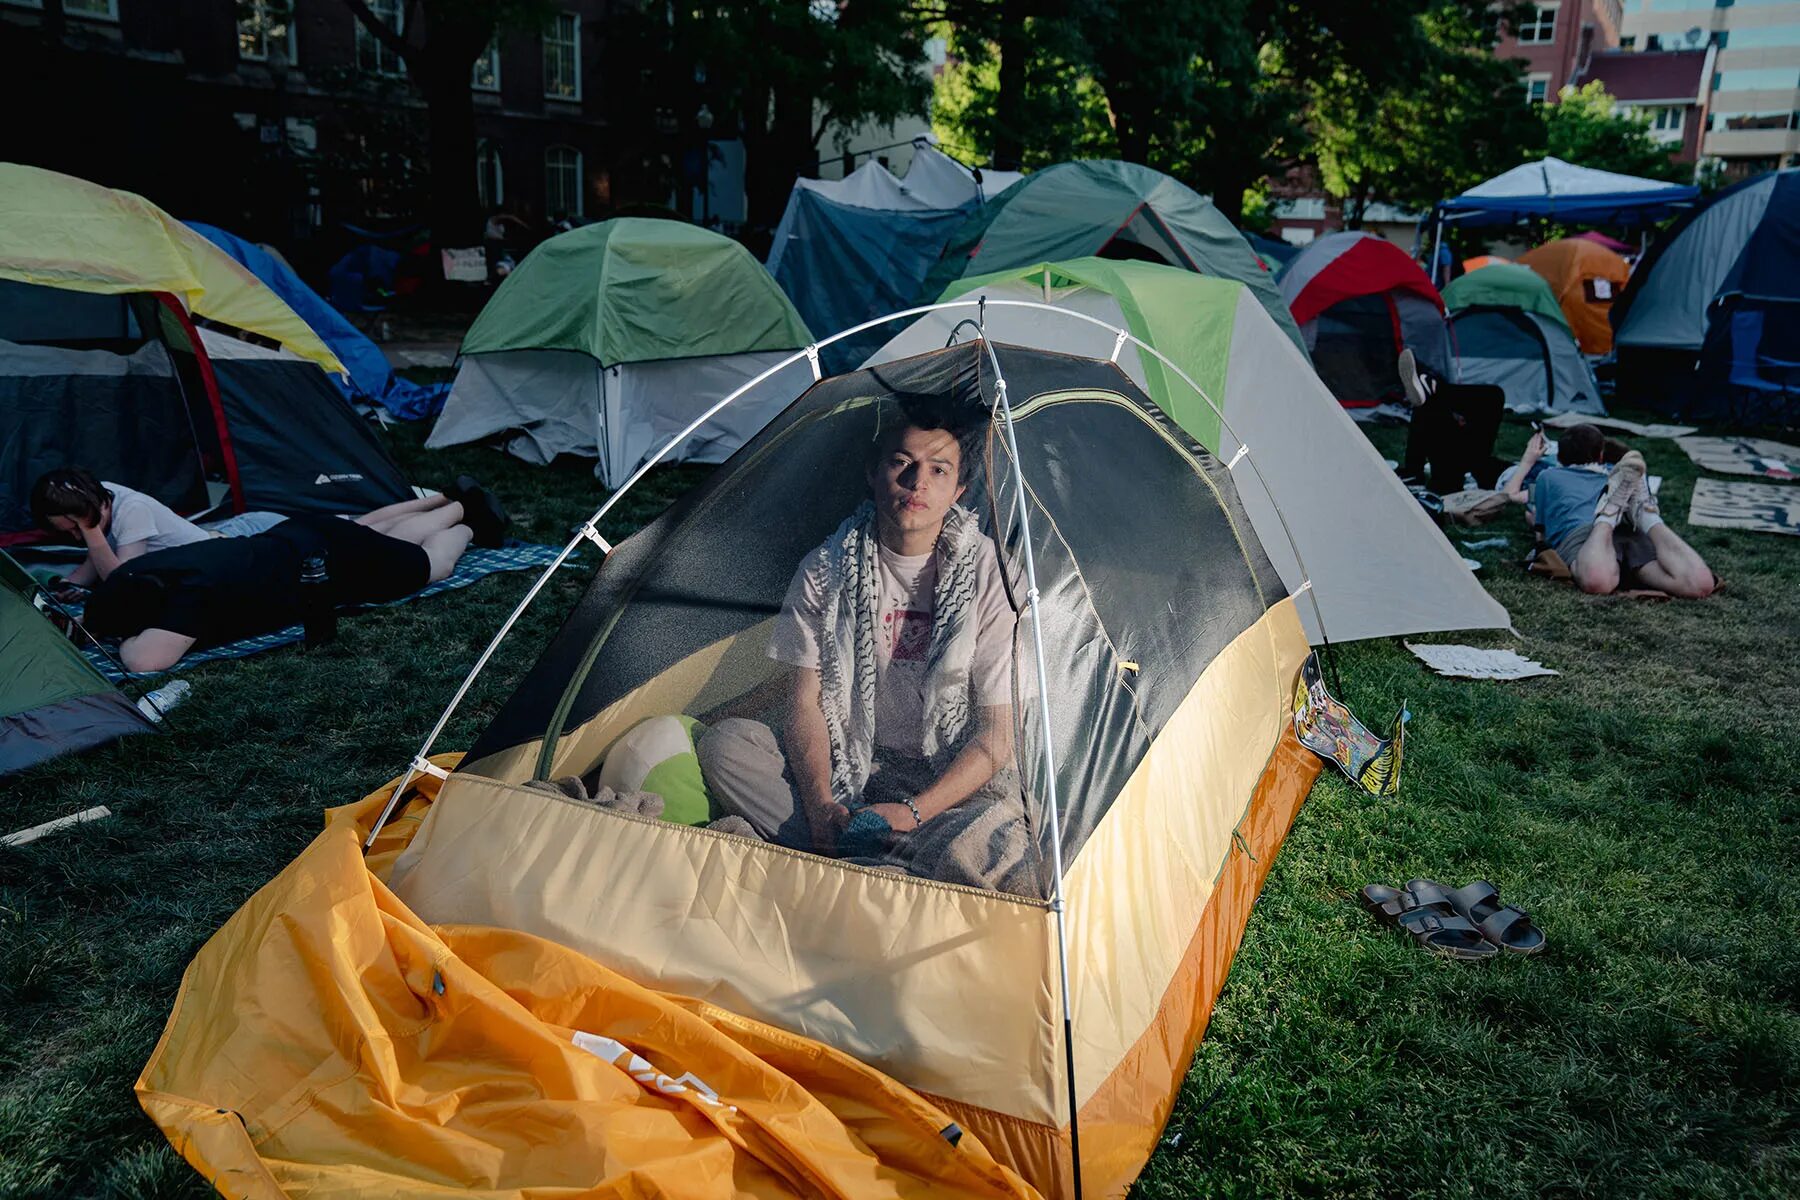 College protest photo essay: Young man with dark hair sits inside small yellow and white dome tent on a green grass lawn surrounded by similar tents and young adults